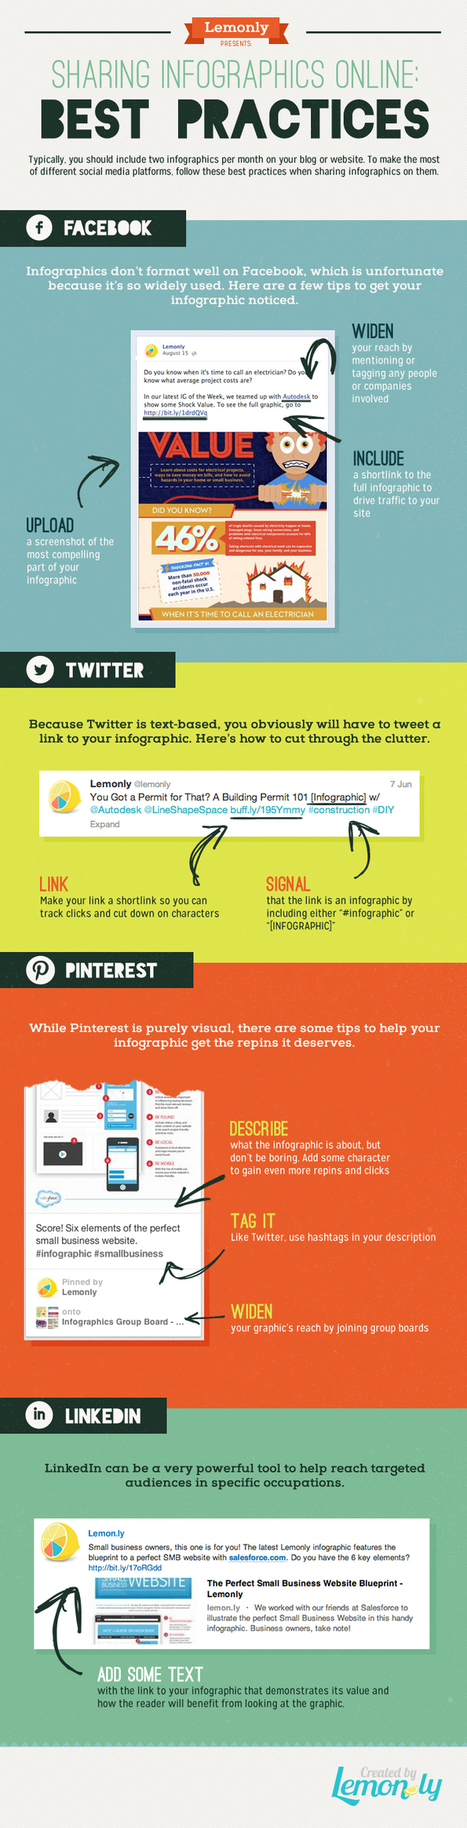 Social Media Best Practices for Infographics | Networked Nonprofits and Social Media | Scoop.it